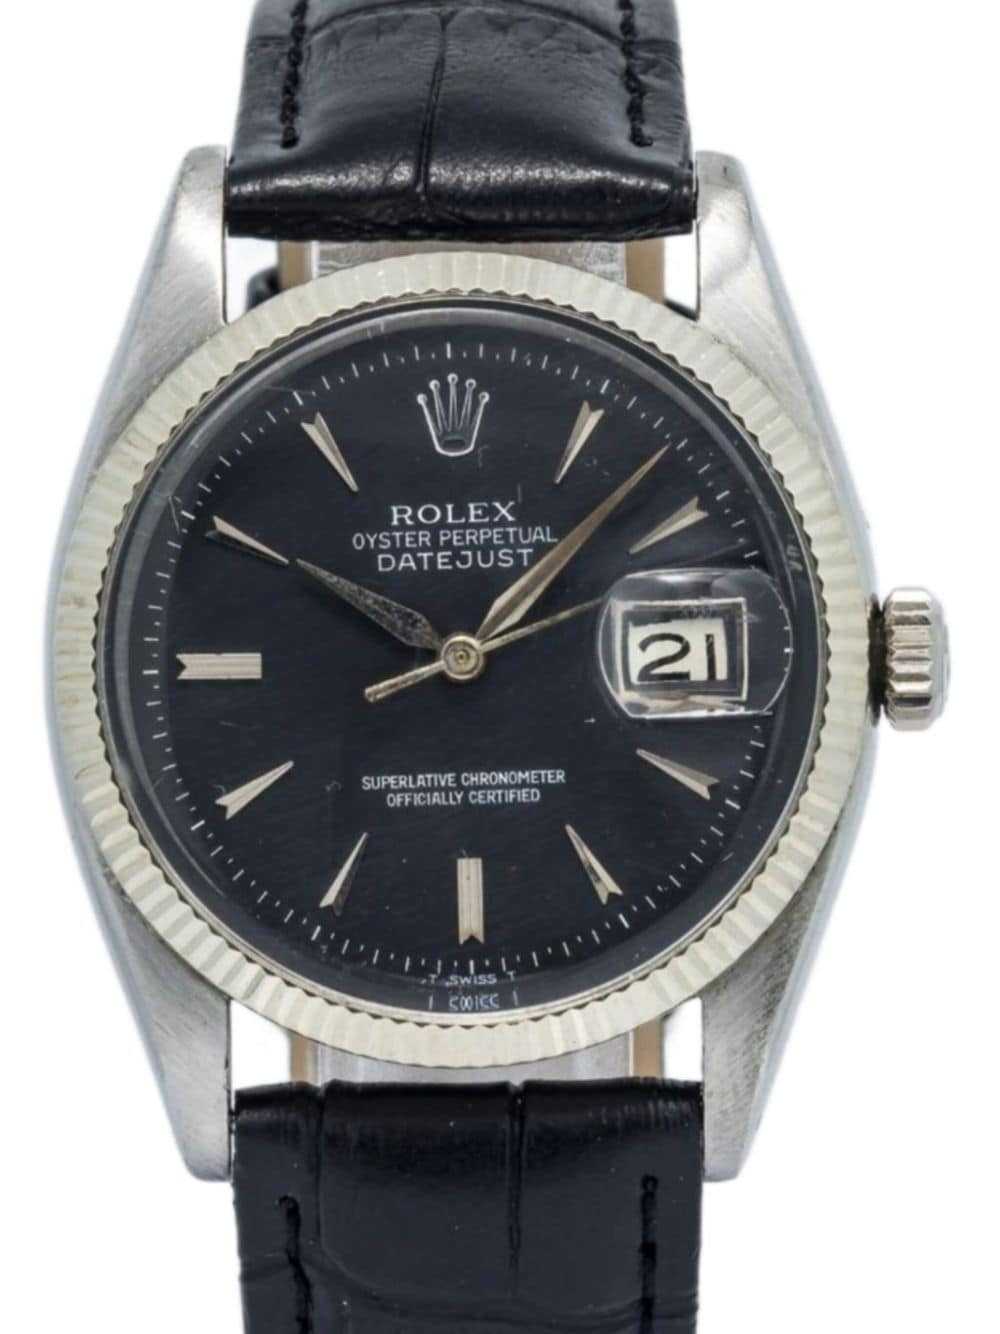 Rolex pre-owned Datejust 36mm - Black - image 2